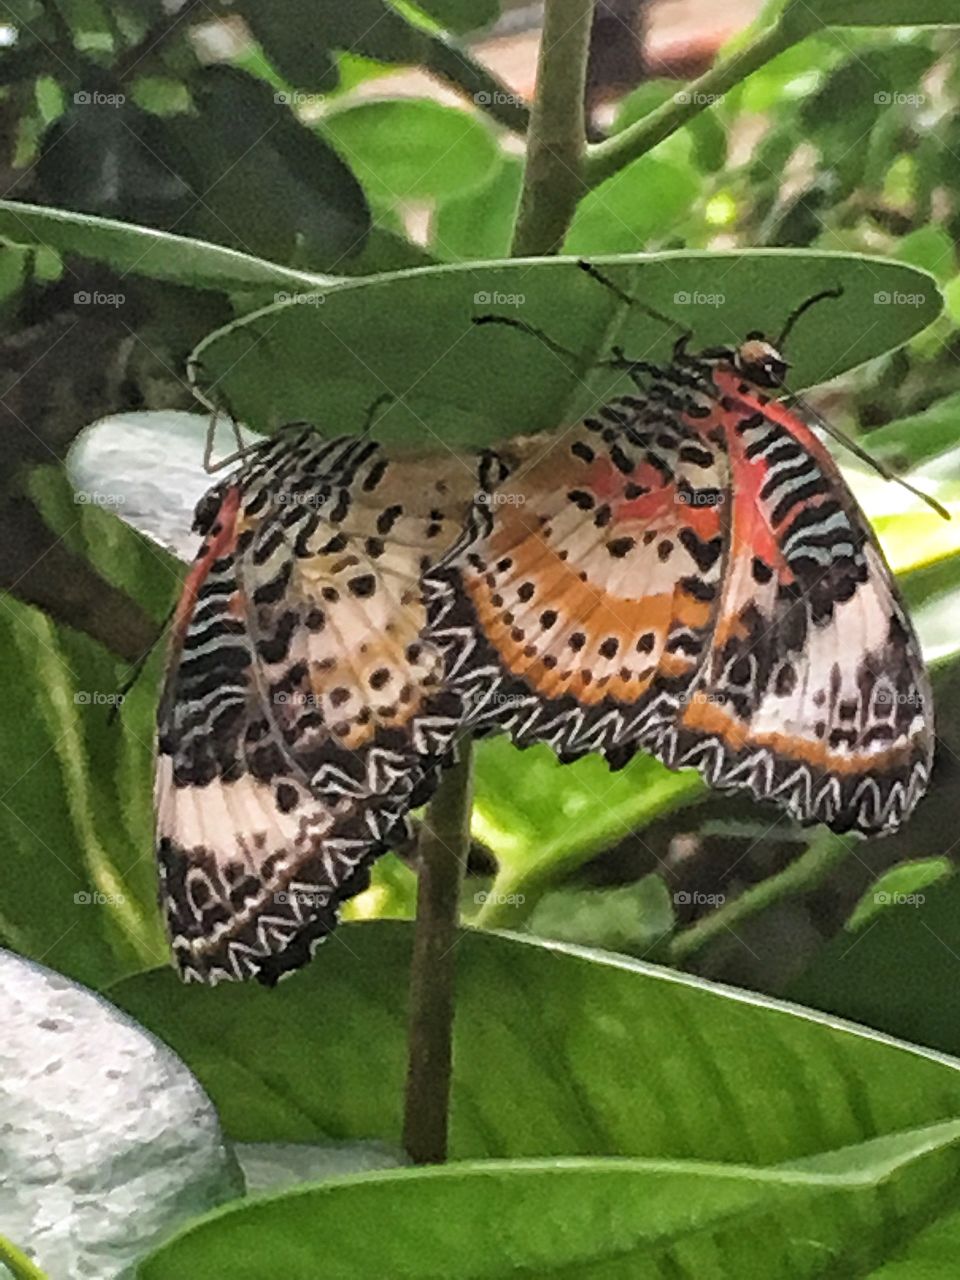 Mating butterfly 